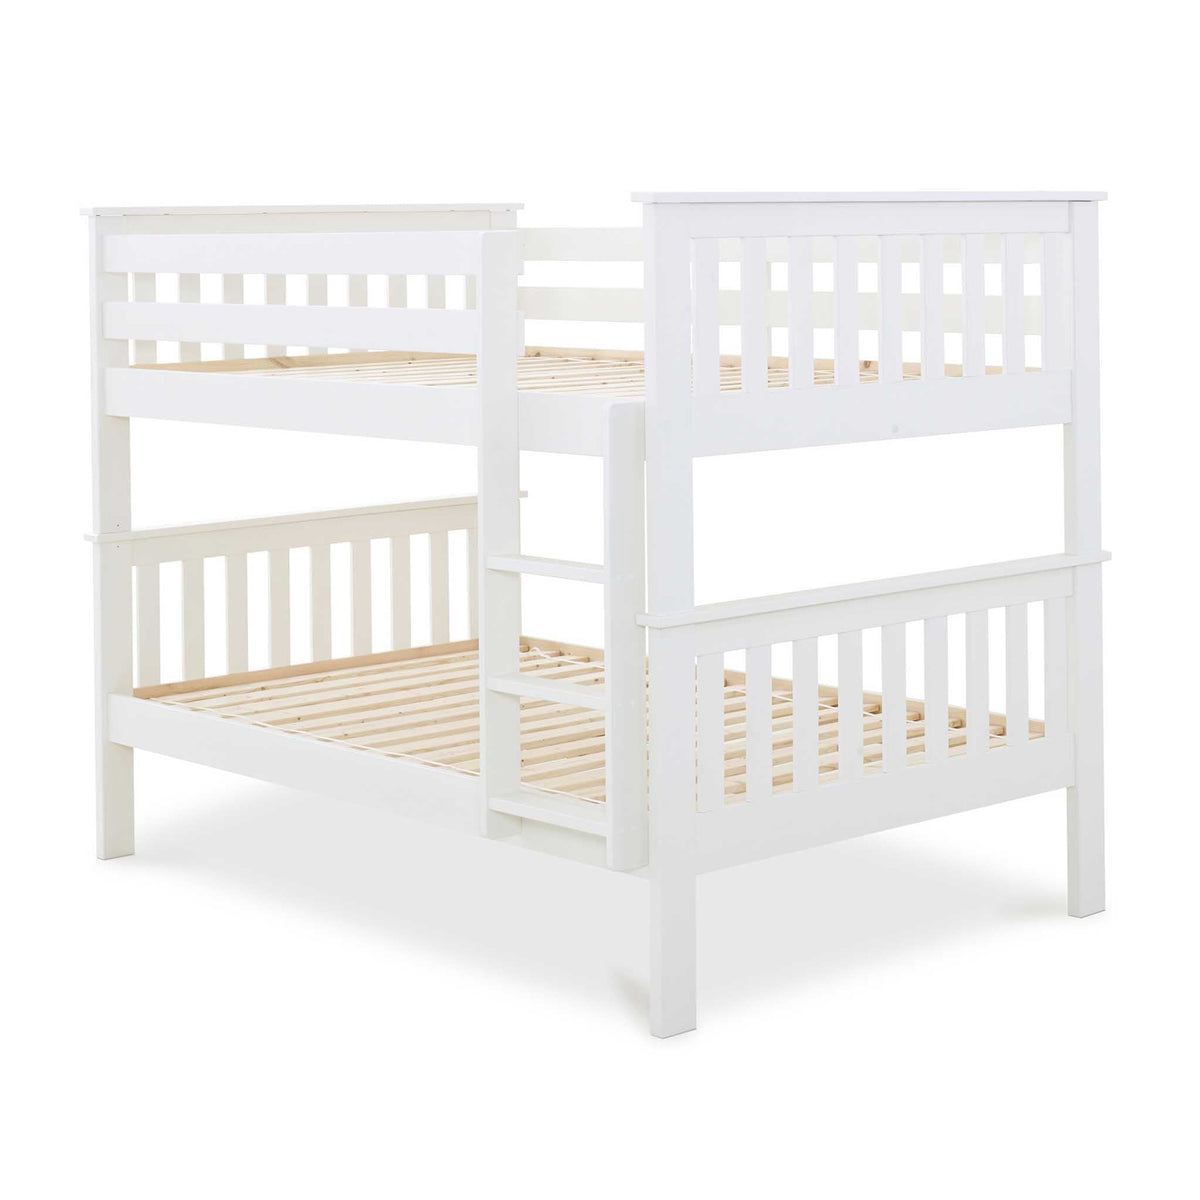 Quad 4 Sleeper Small Double Bunk Bed